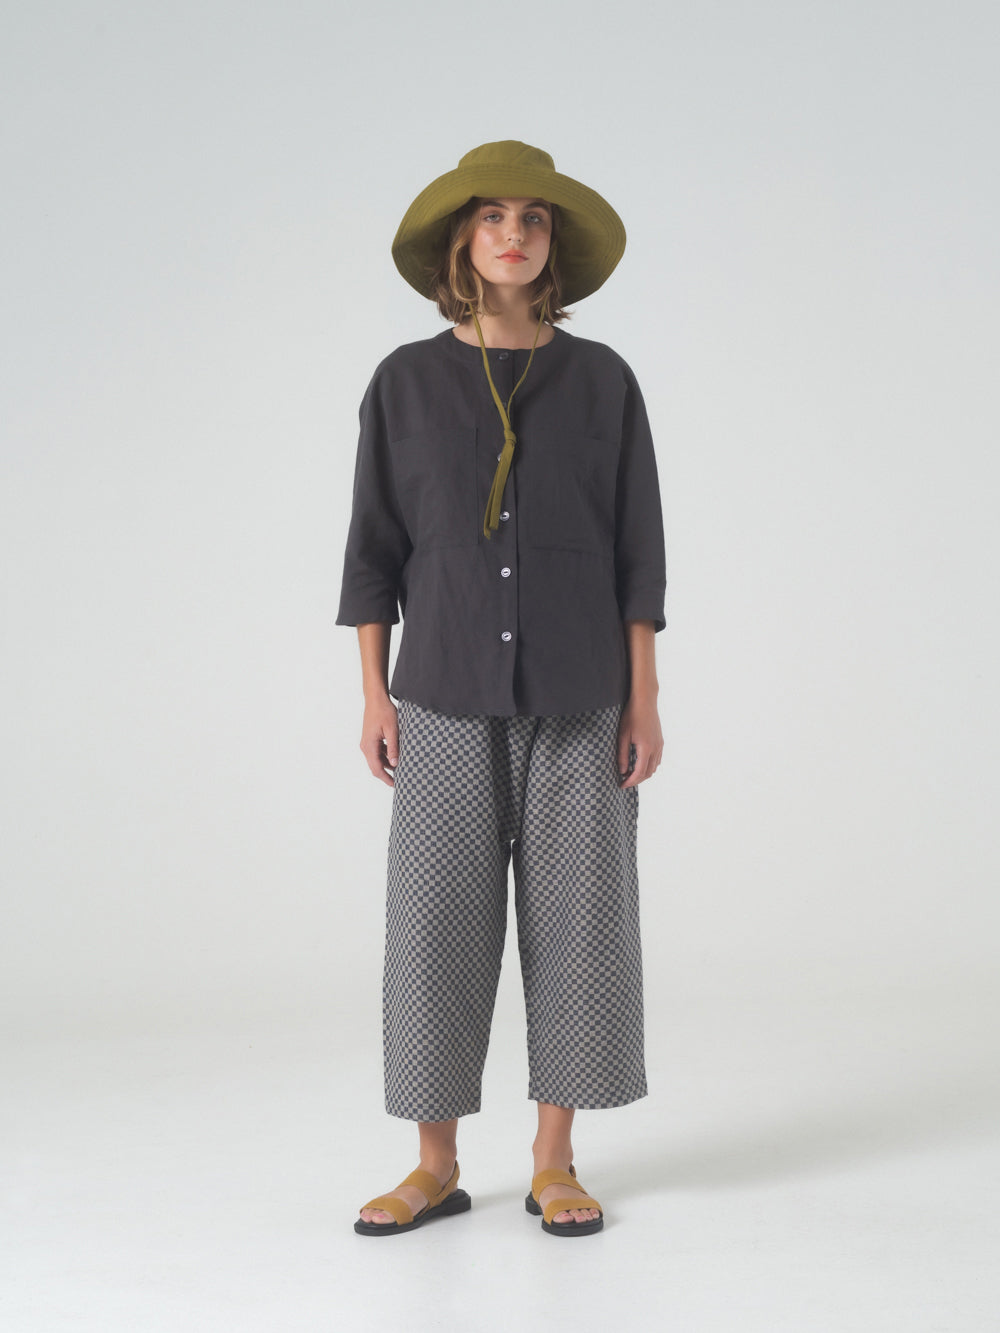 SAMPLE SALE - Hilma Top in Charcoal - SMALL